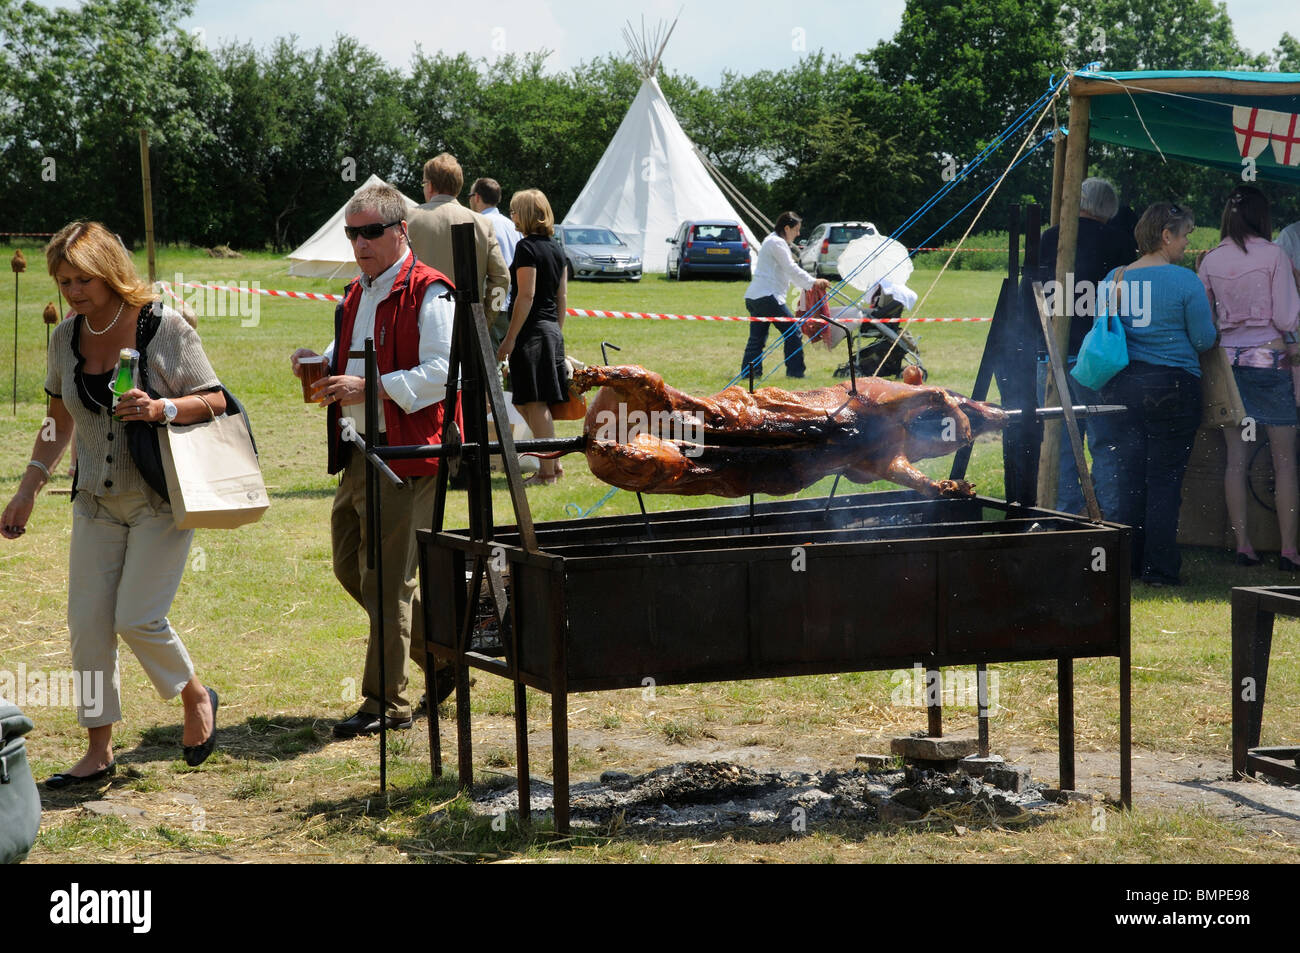 Hog roast on the spit at a midsummer country fair in Kent England UK Stock Photo